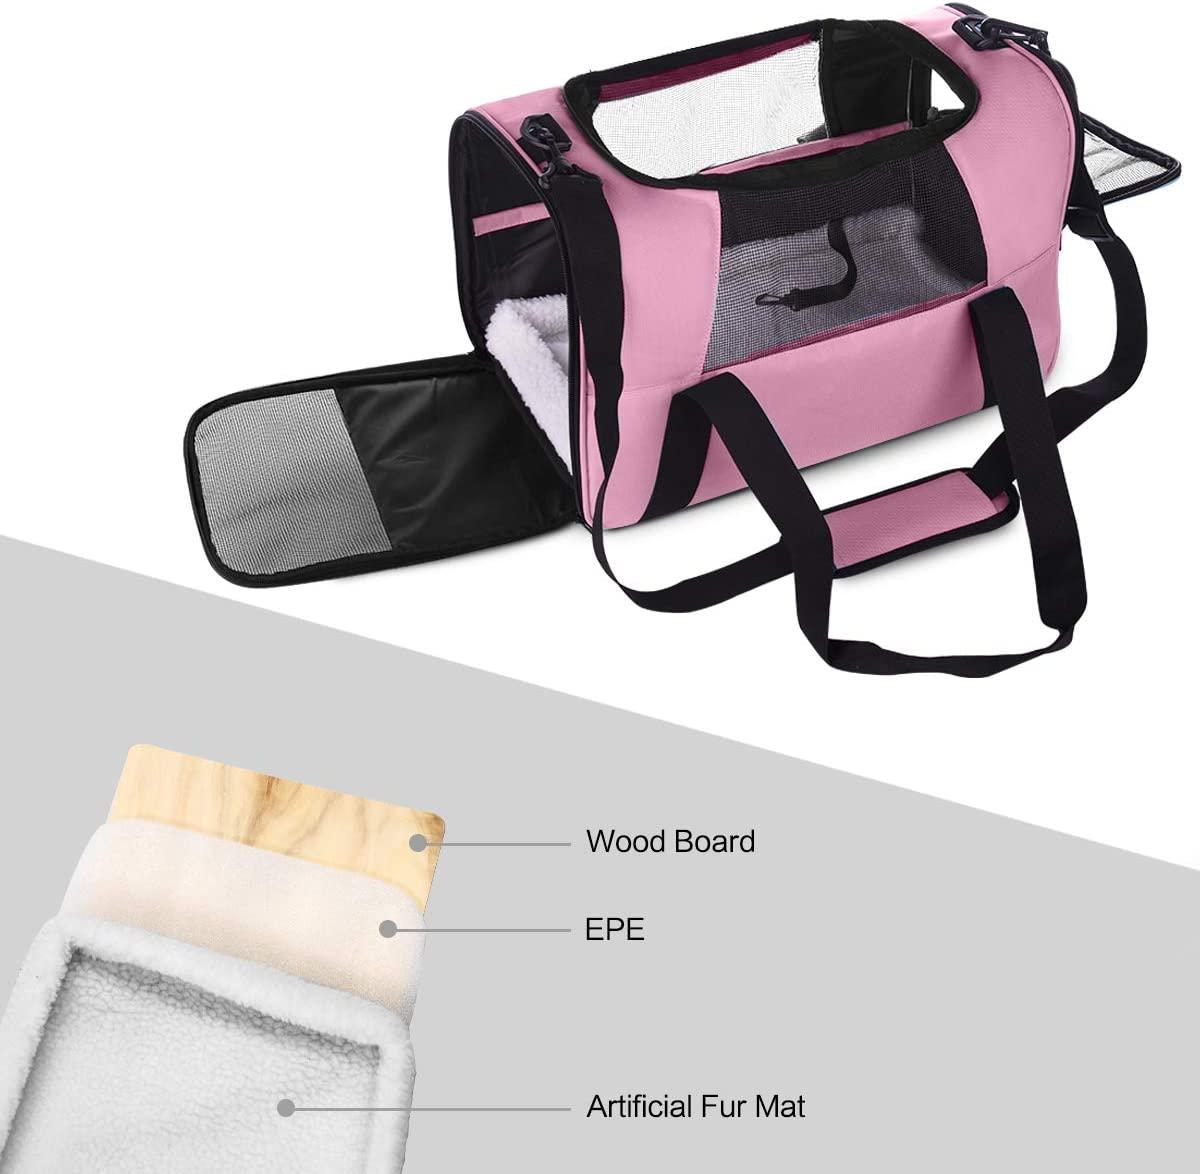 NAT Dog Carrier Cat Carrier Pet Carrier, Airline Approved Dog Carrier with  Mesh Window, Breathable, Collapsible,Soft-Sided,Escape Proof,Easy Storage,  Best for Small Medium Cats Dogs Medium Pink